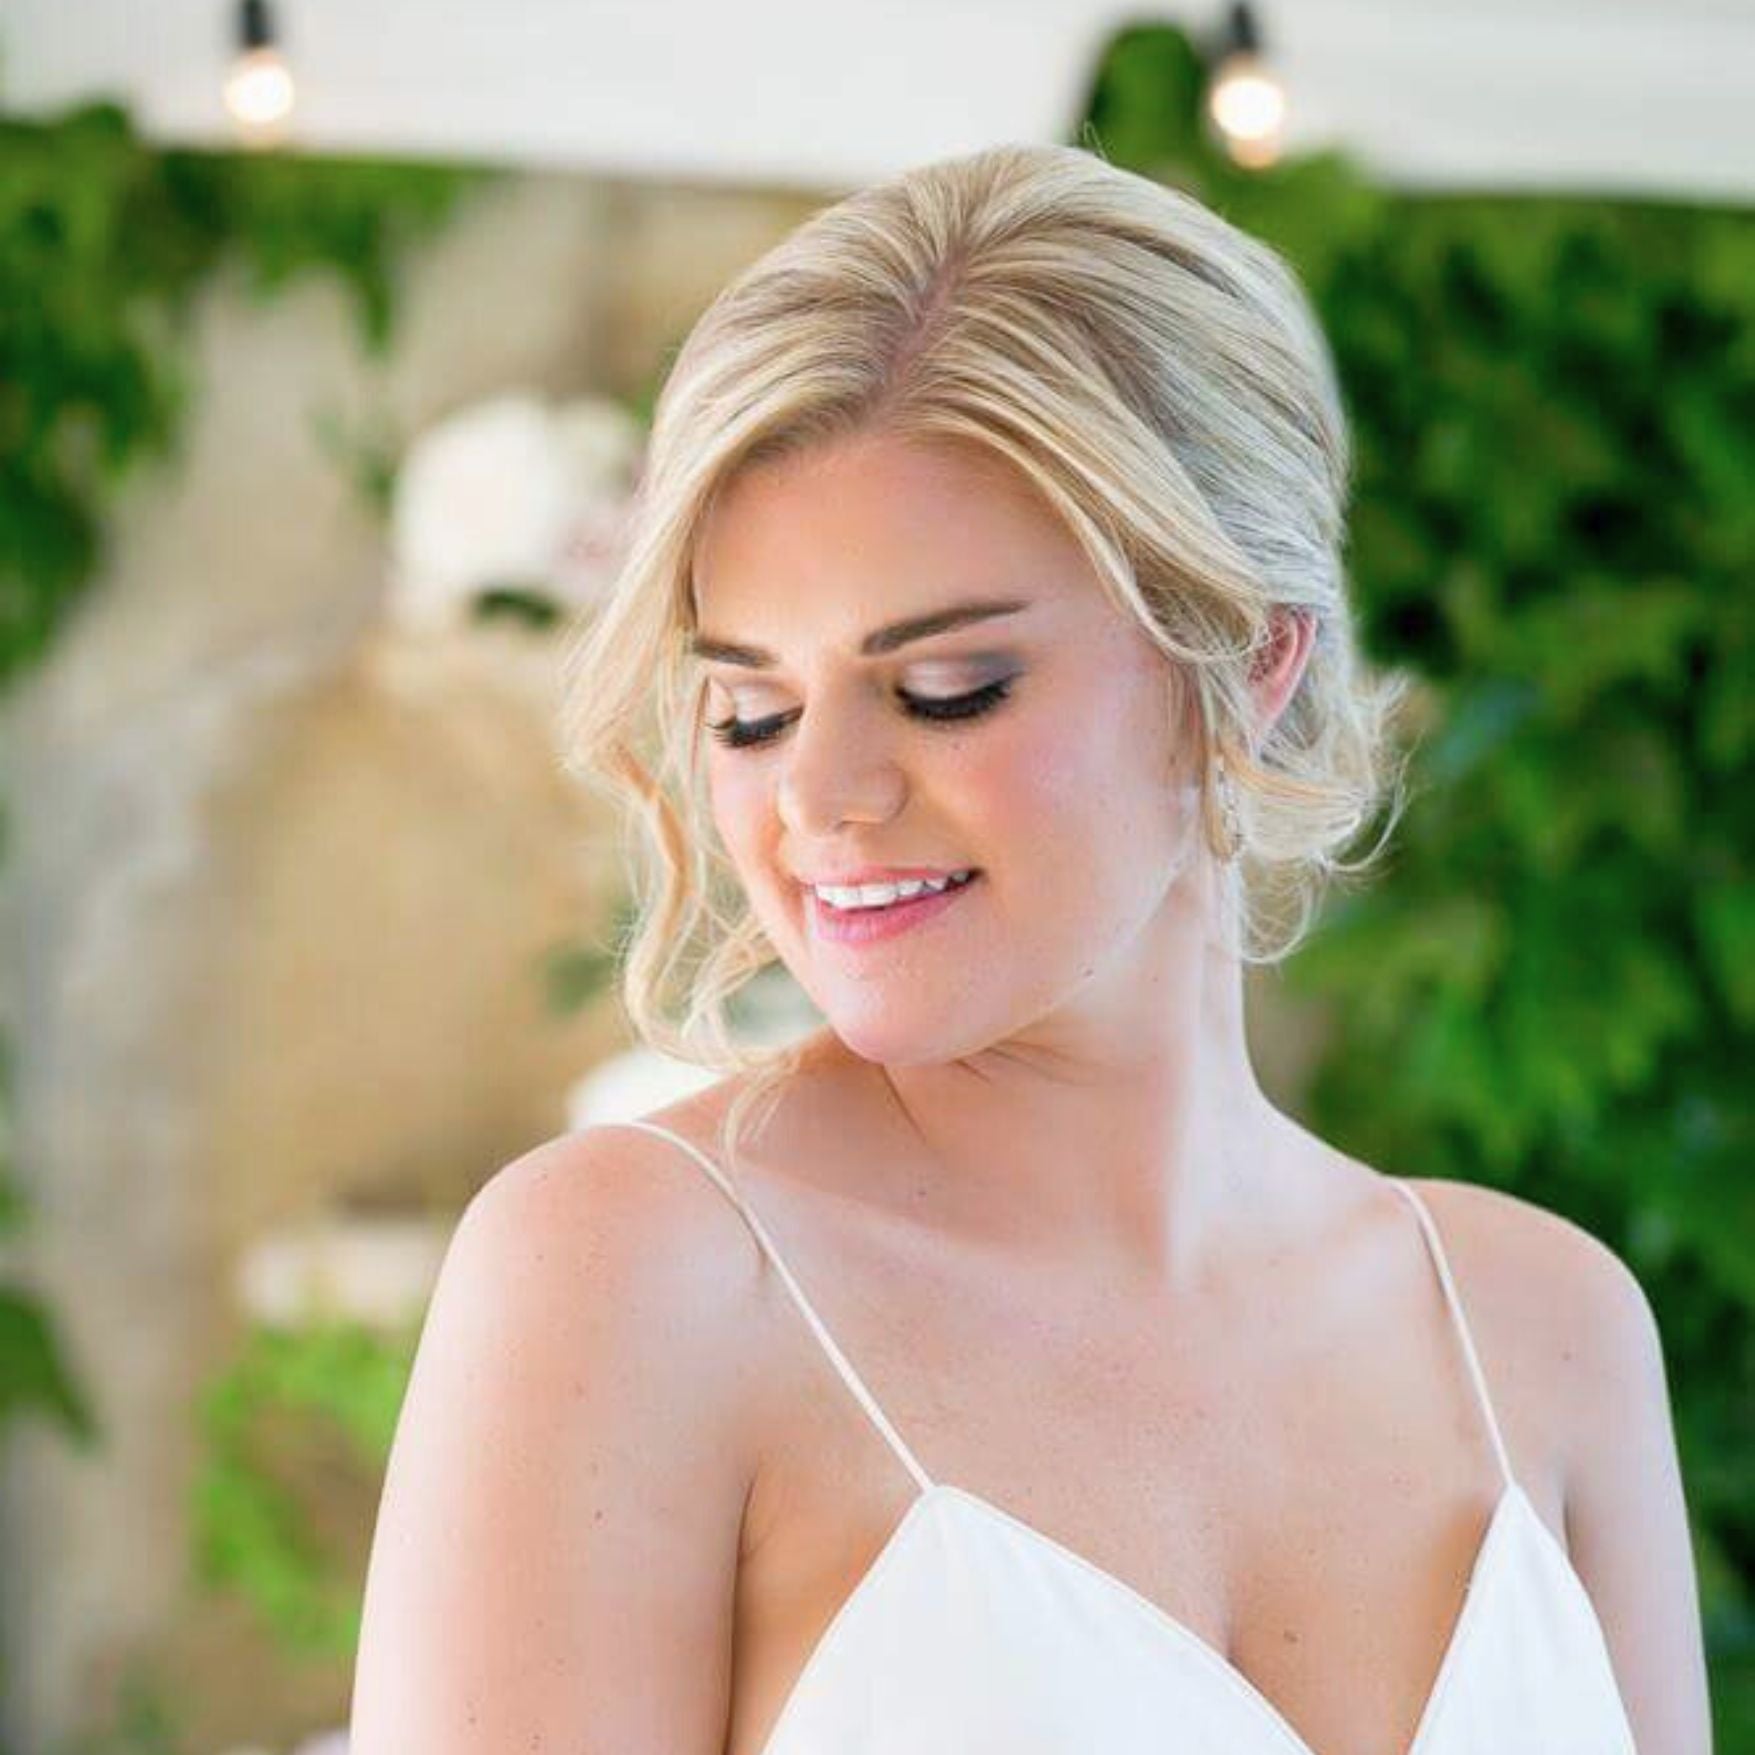 Bride model showcasing hair and makeup services for special events